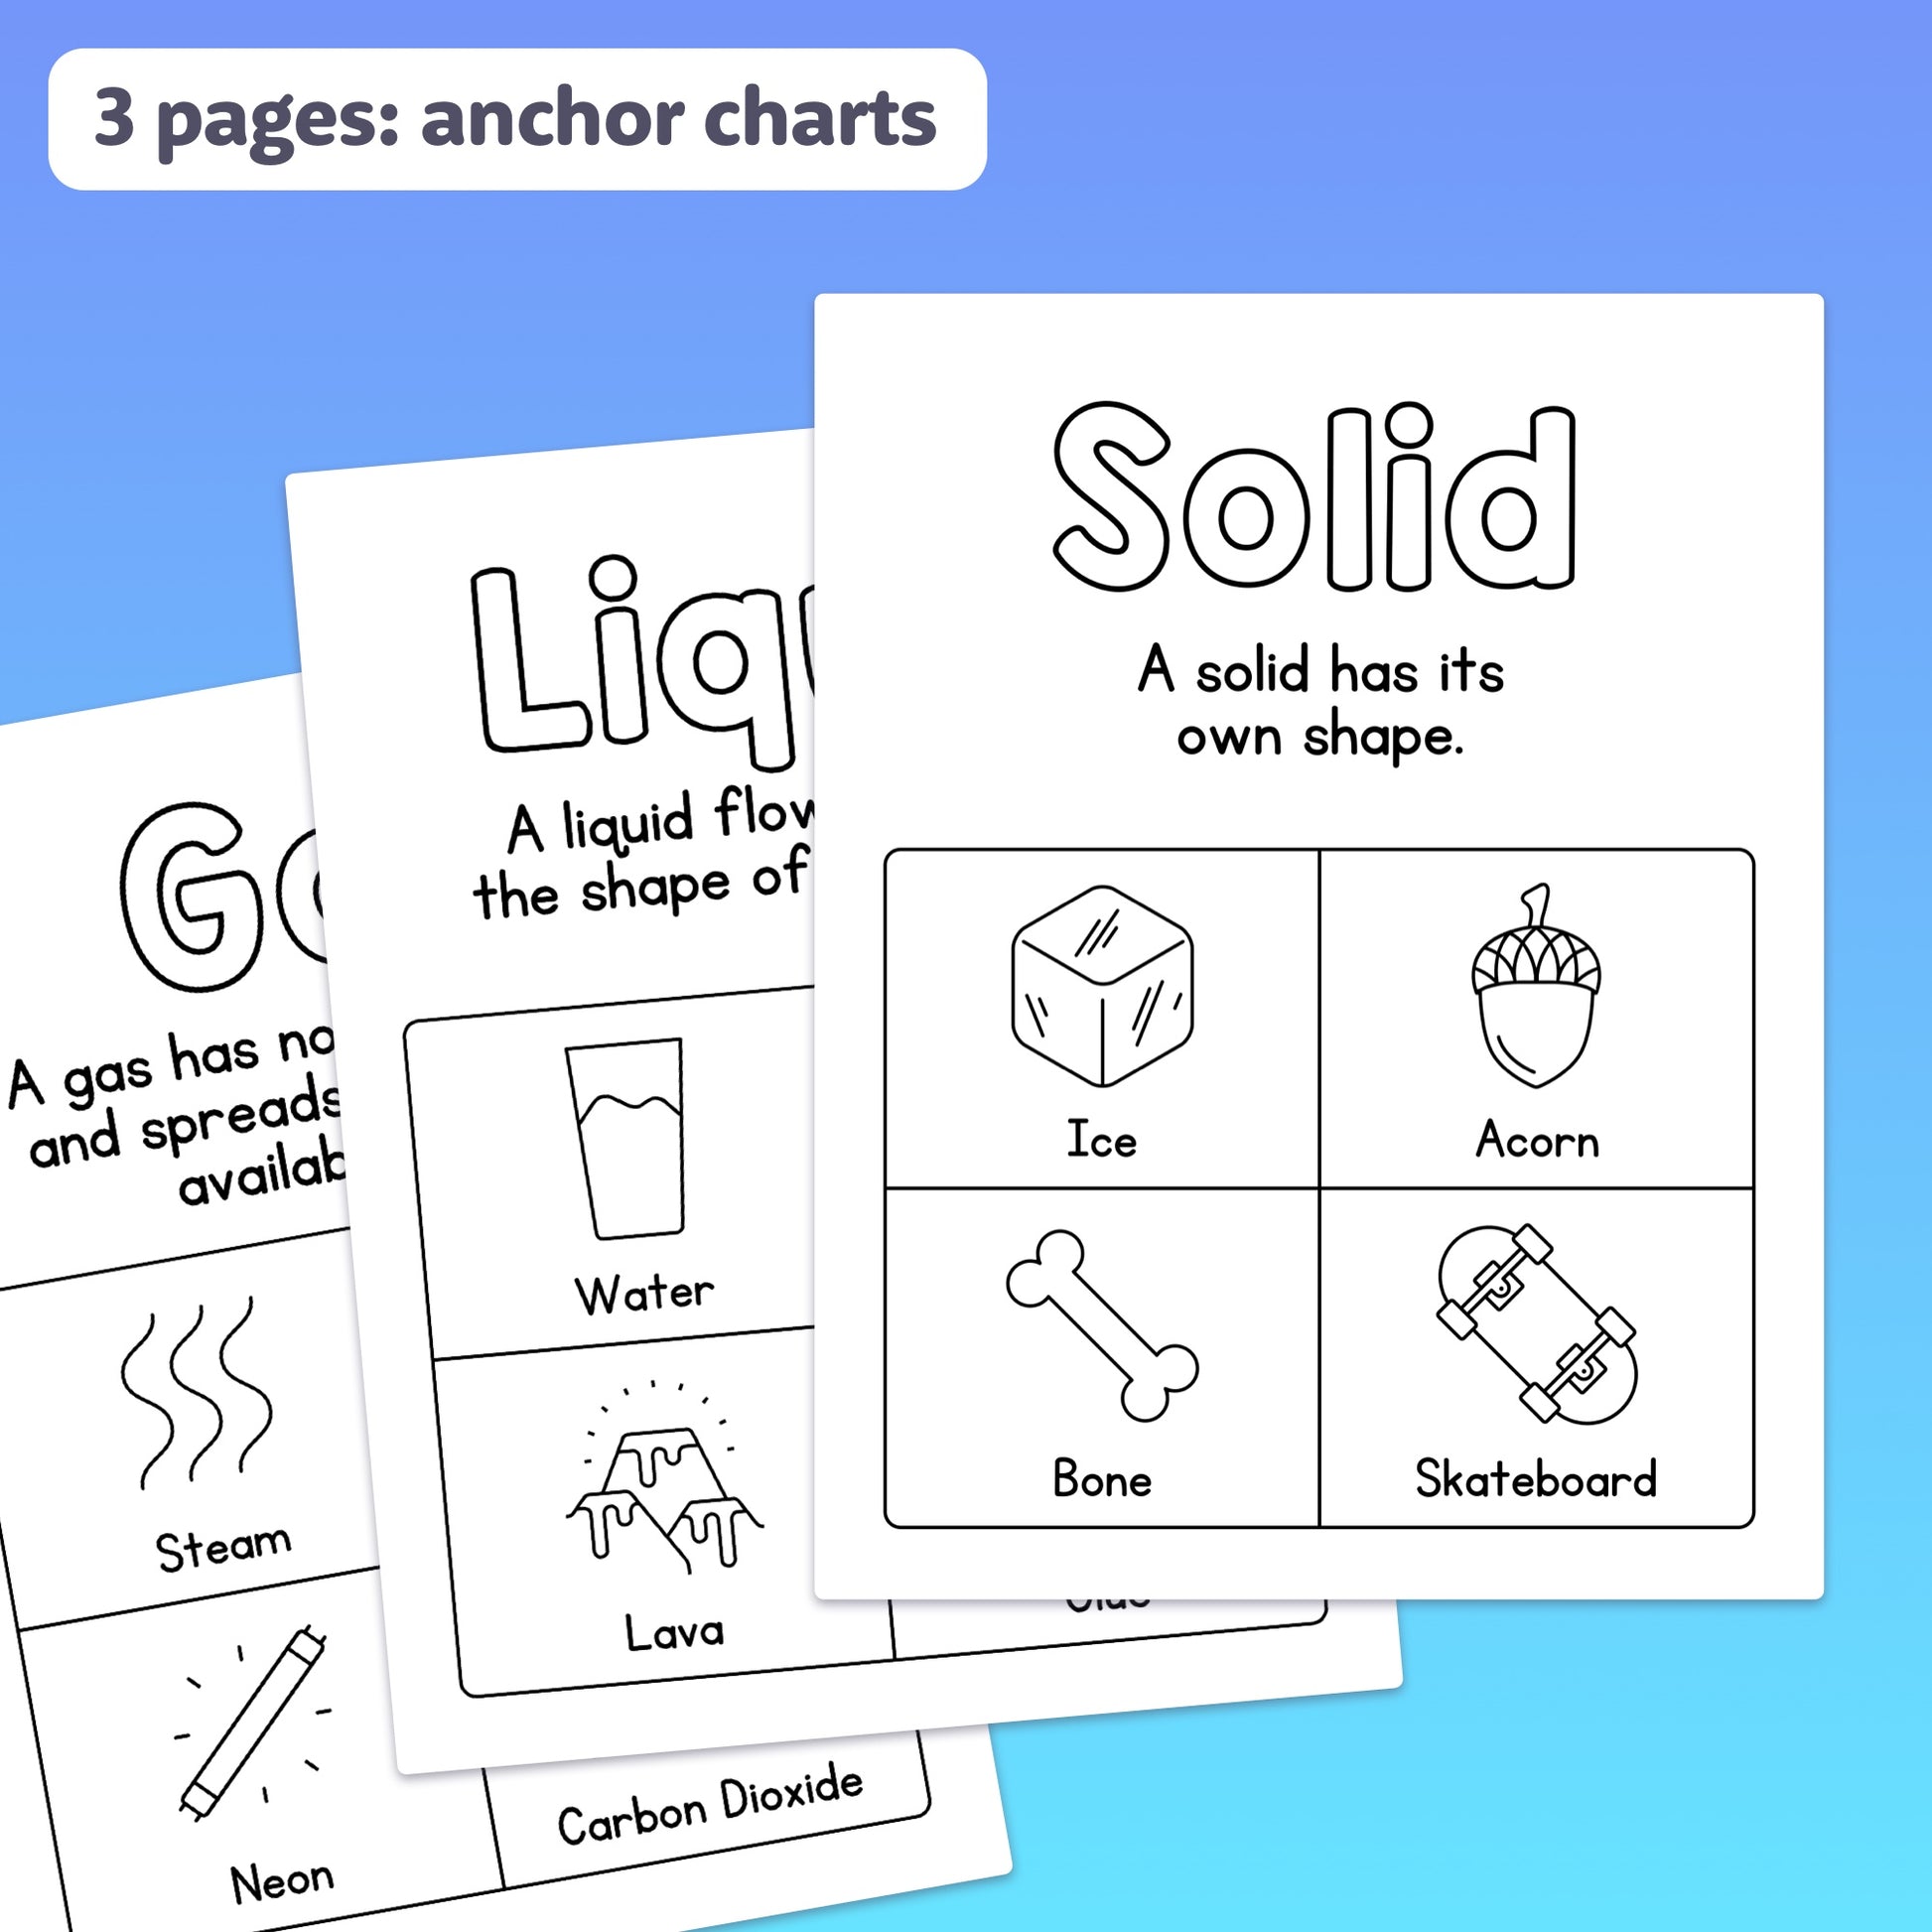 Solid, liquid, and gas anchor charts